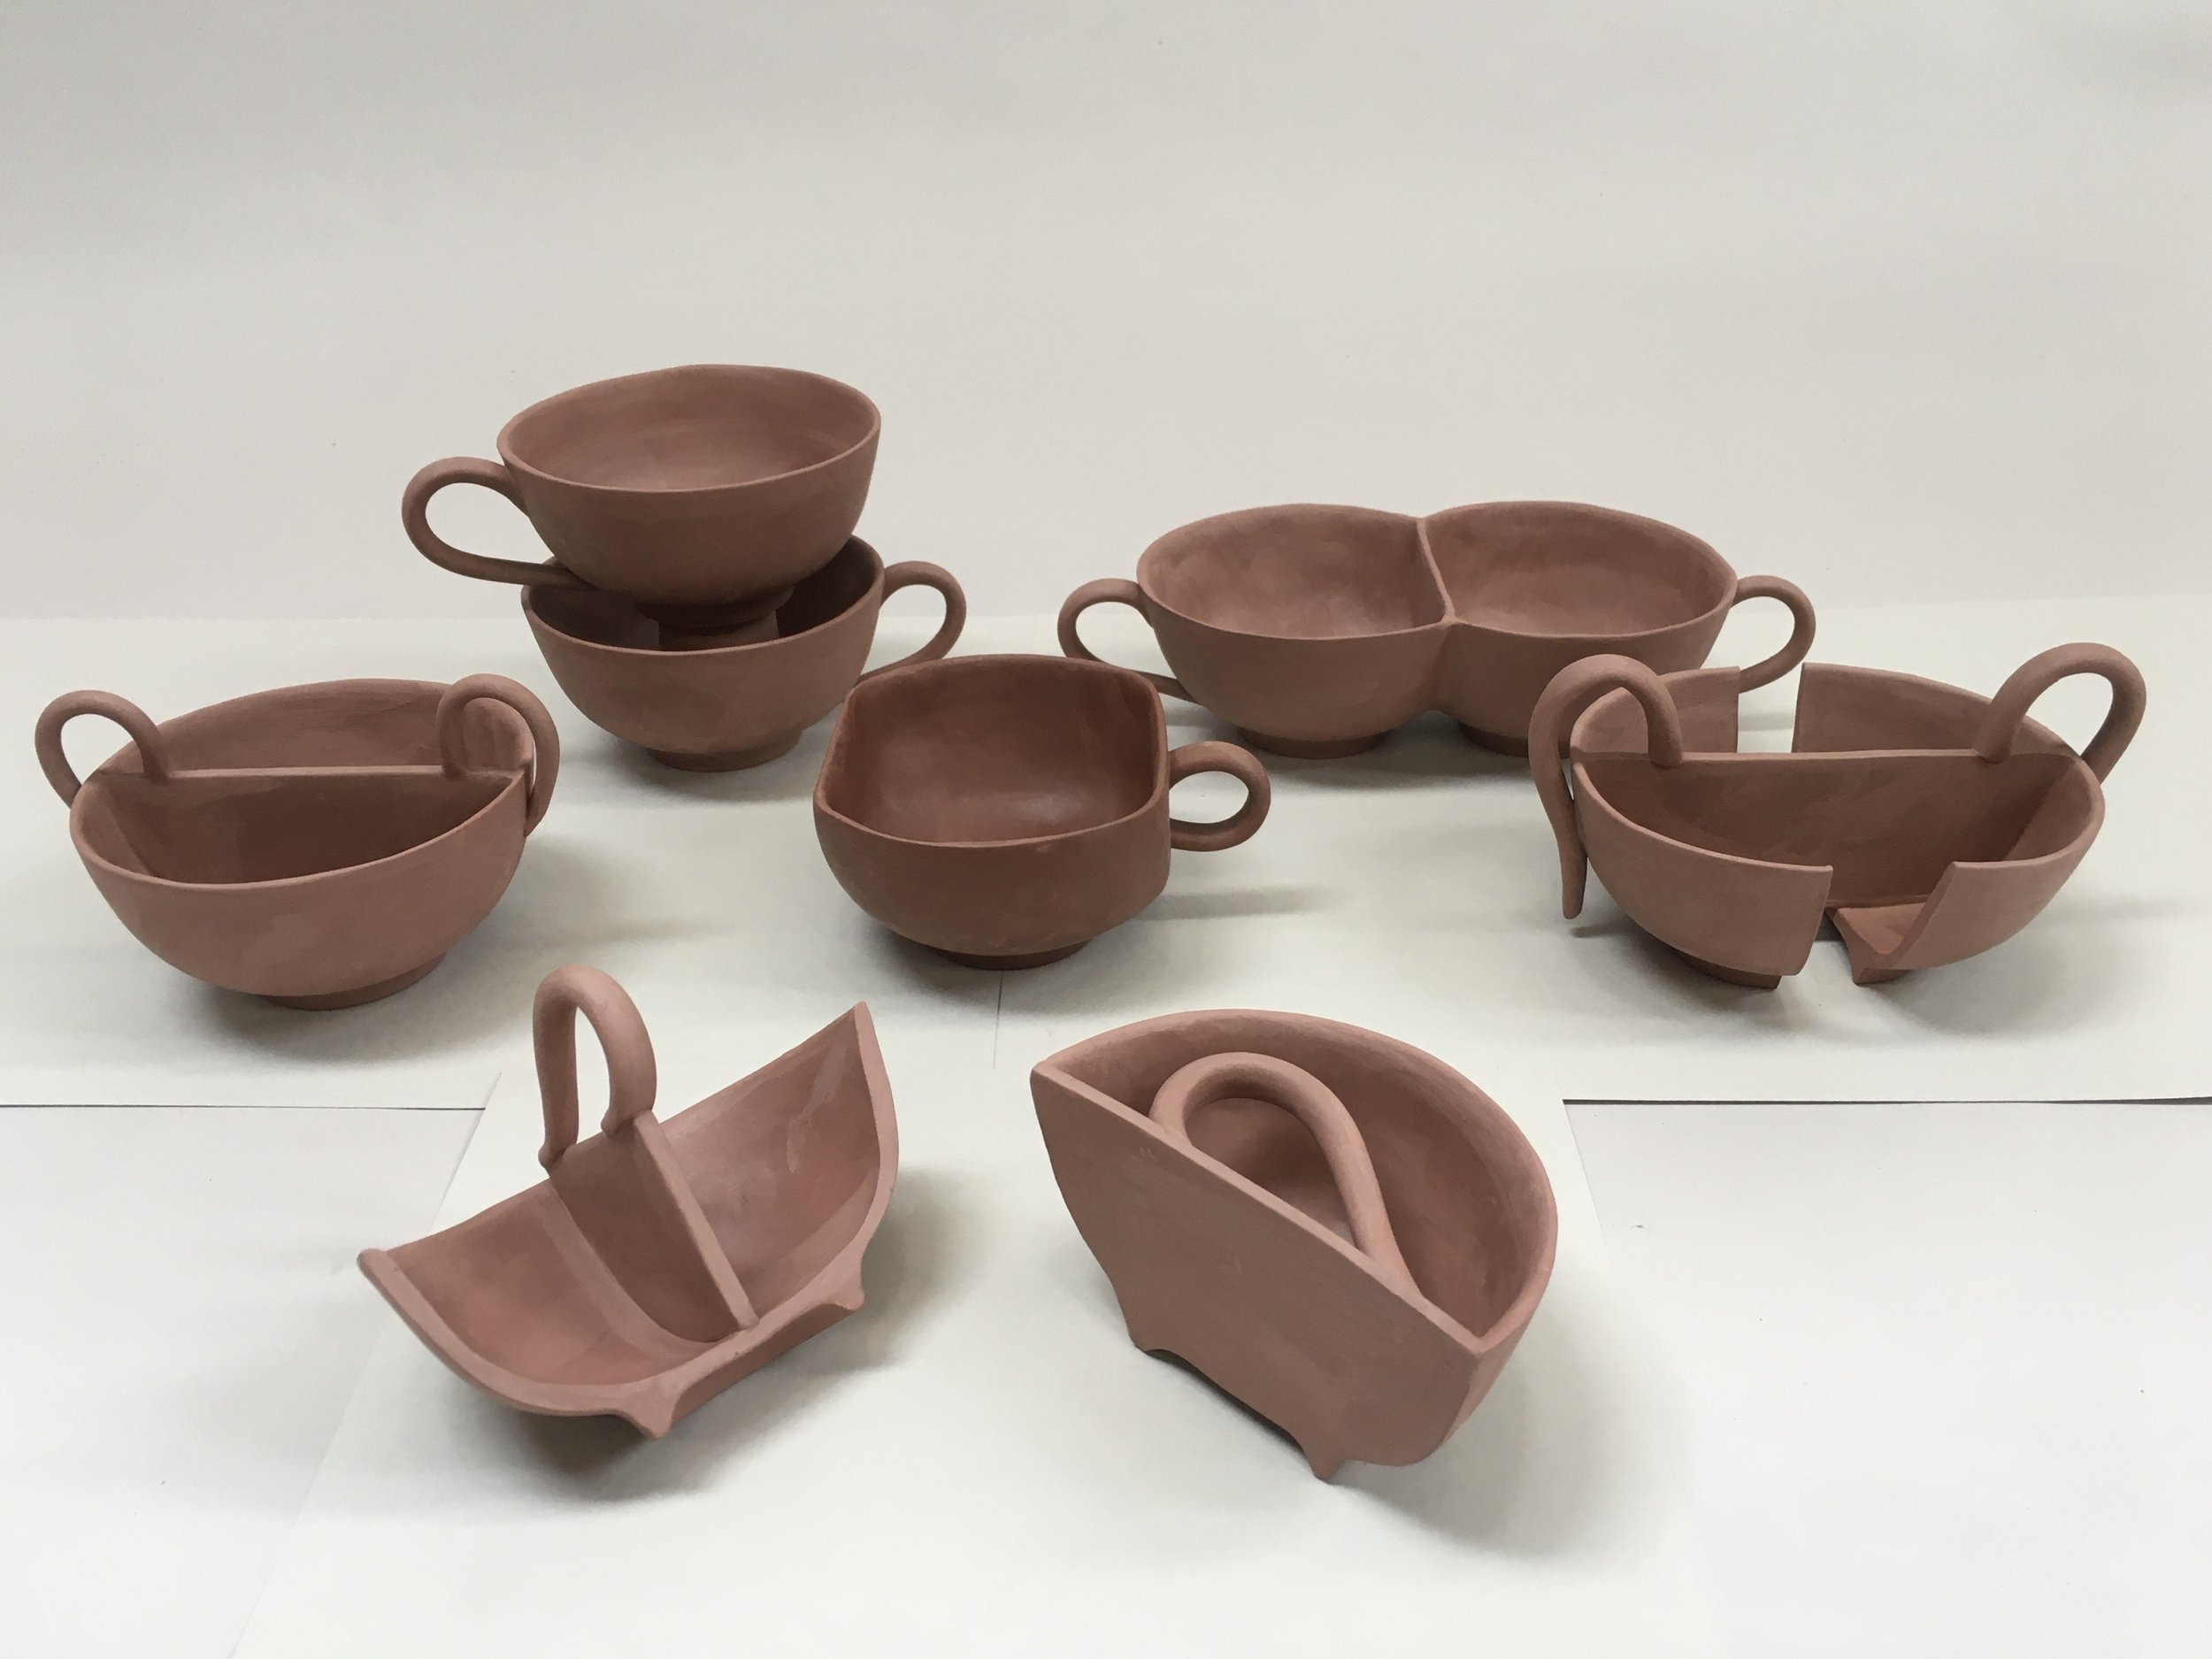  The exploration that led to “Cut Cups” began by slicing and dicing my signature teacup  and recombining the parts.  Eventually the cups became totally non-functional and abstract. 